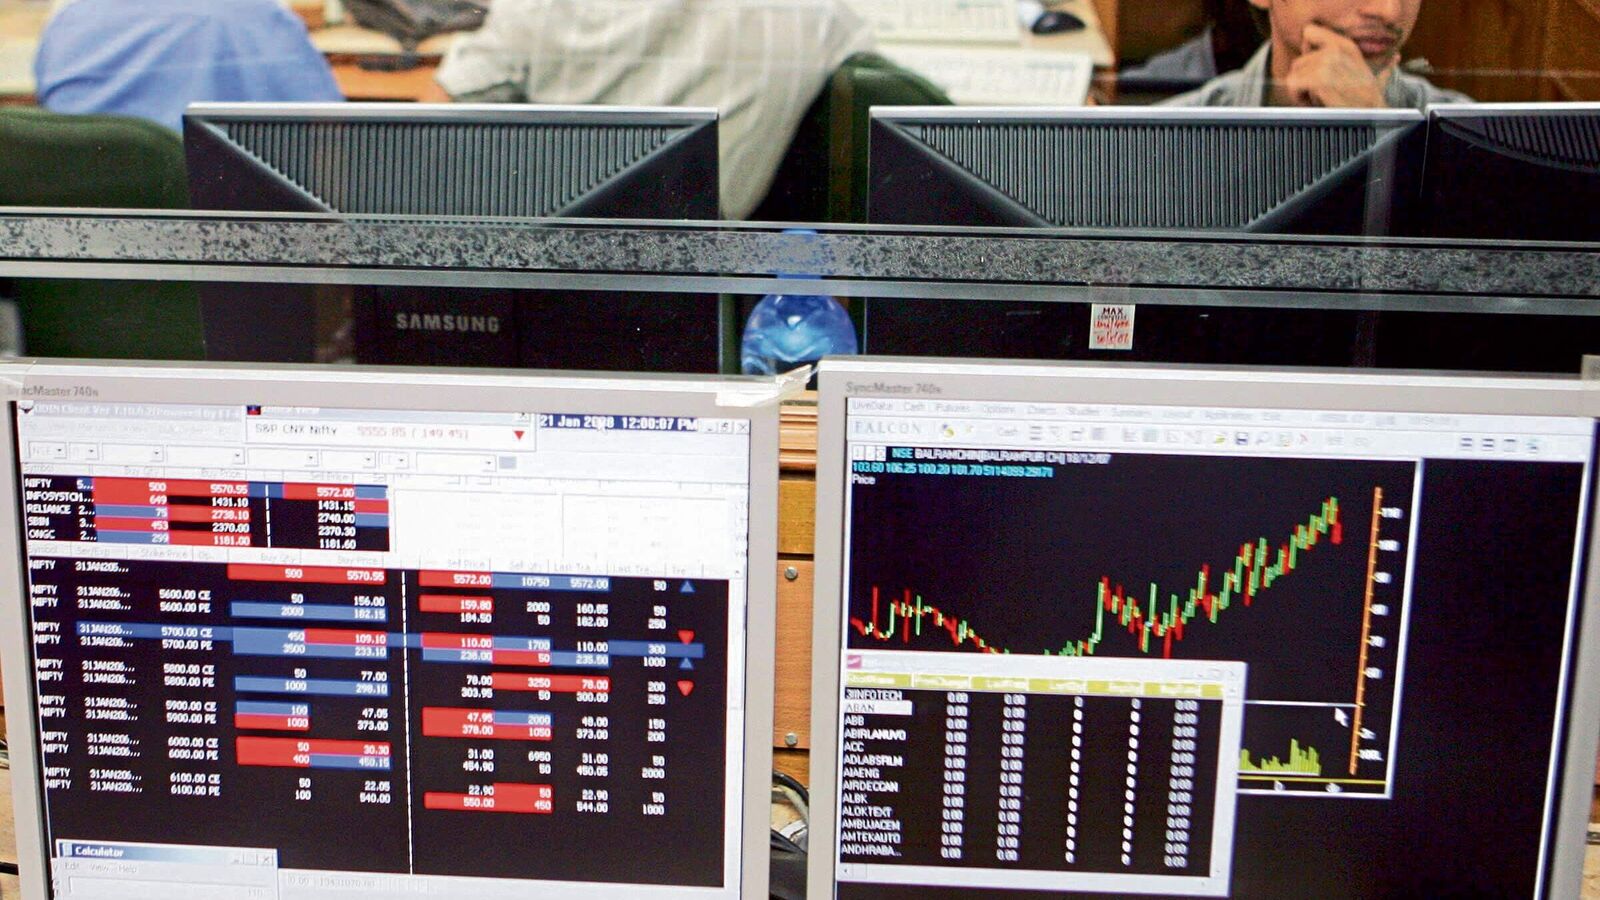 Nifty 50, Sensex on May 16: What to expect in trading today